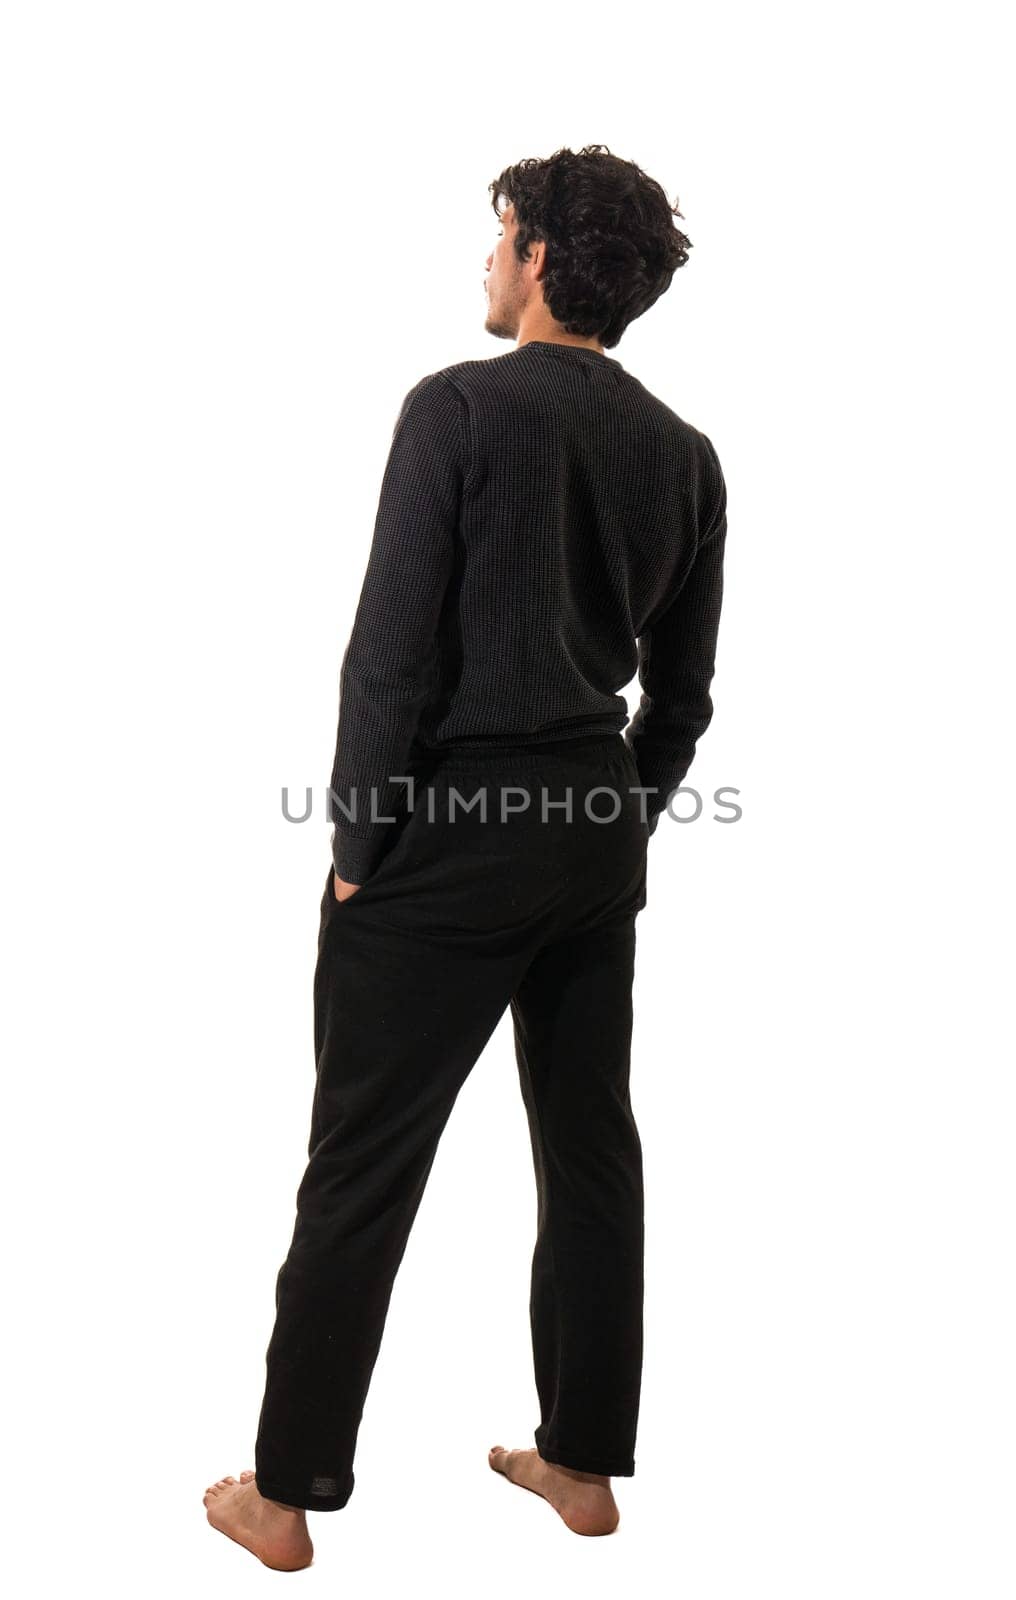 A Man in Black Sweater and Pants, Looking Confident and Stylish by artofphoto